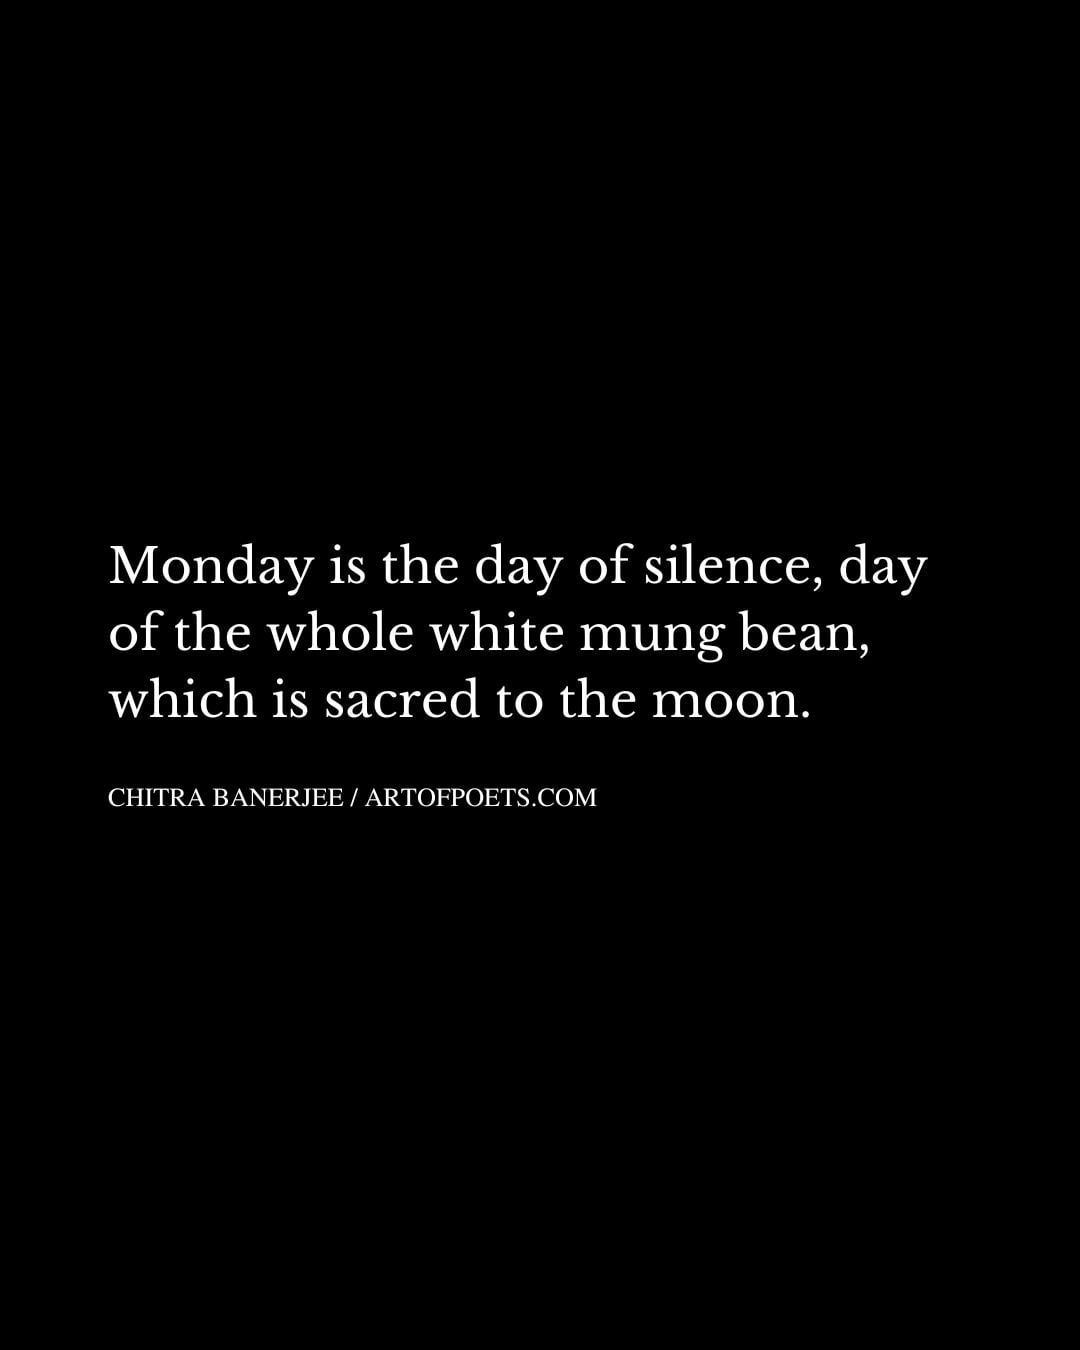 Monday is the day of silence day of the whole white mung bean which is sacred to the moon